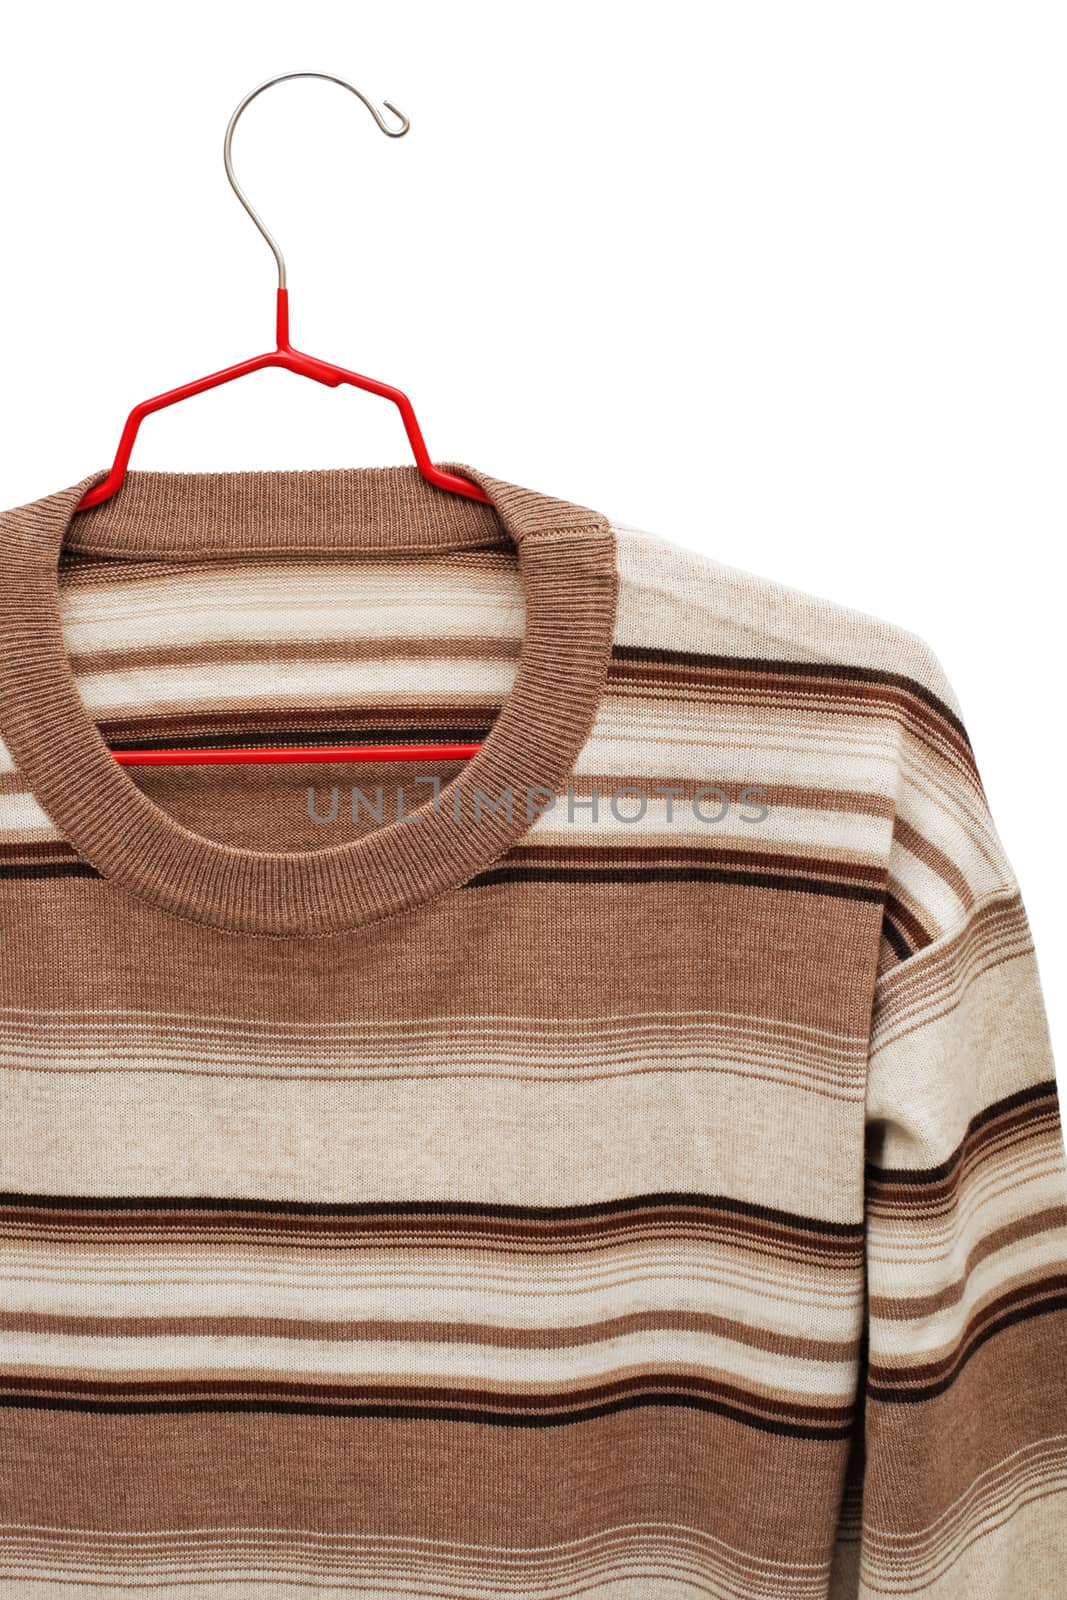 warm striped sweater on a white background